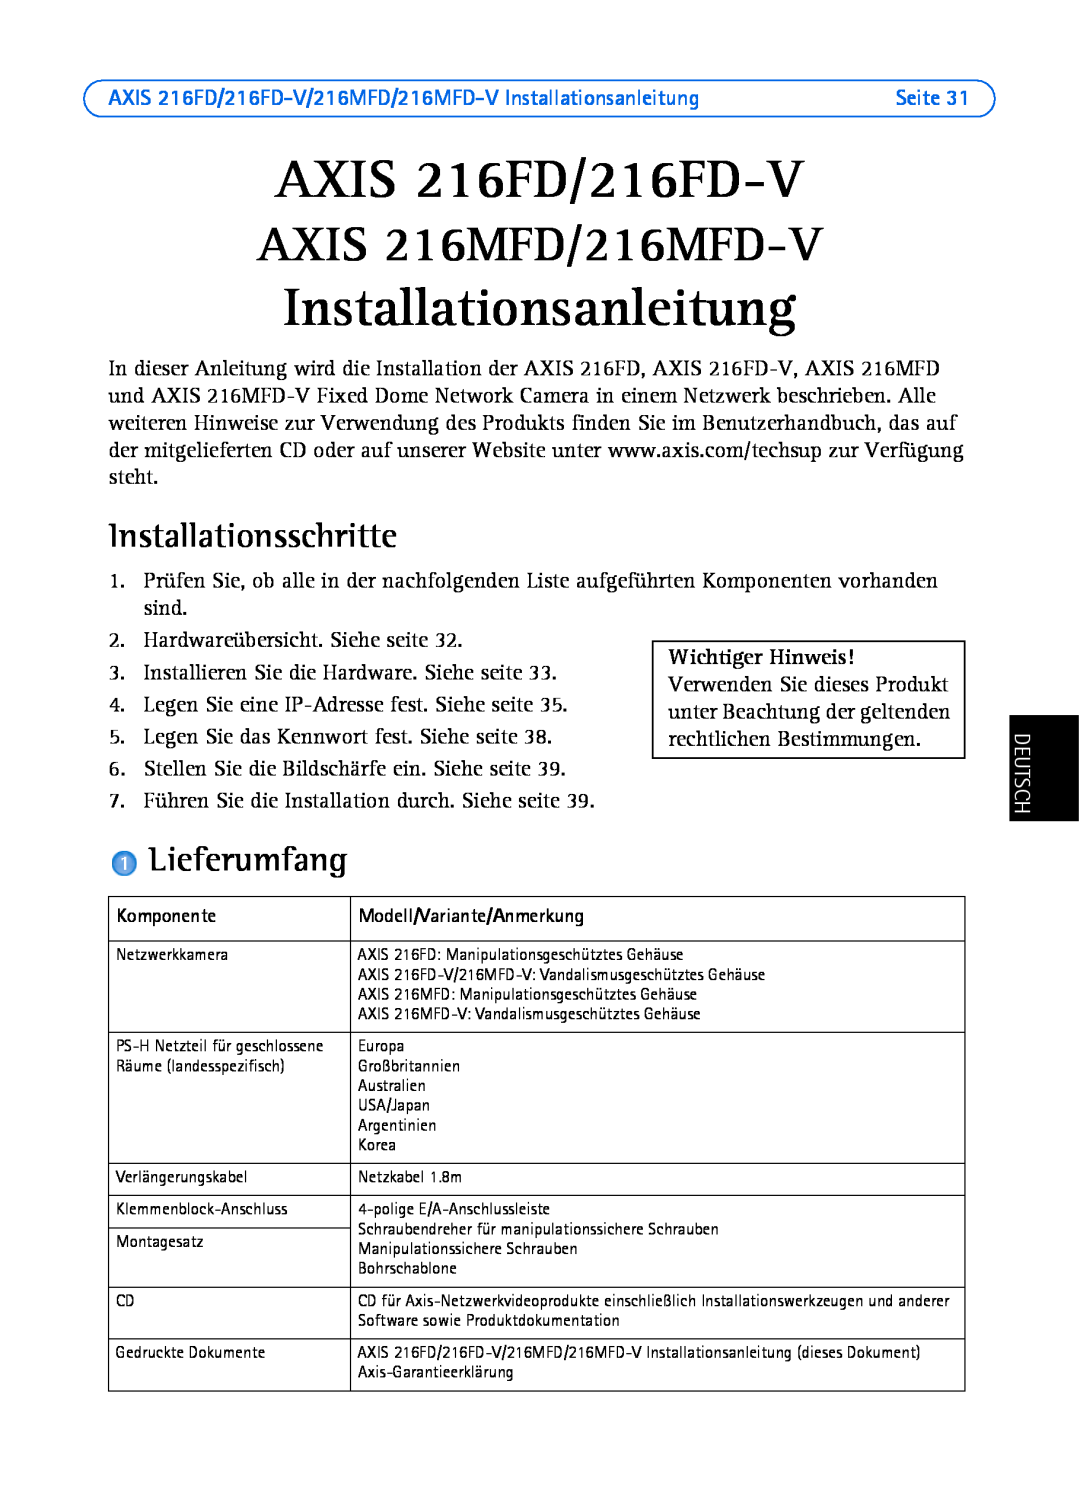 Axis Communications AXIS 216FD-V Installationsanleitung, AXIS 216MFD/216MFD-V, Installationsschritte, Lieferumfang, Seite 